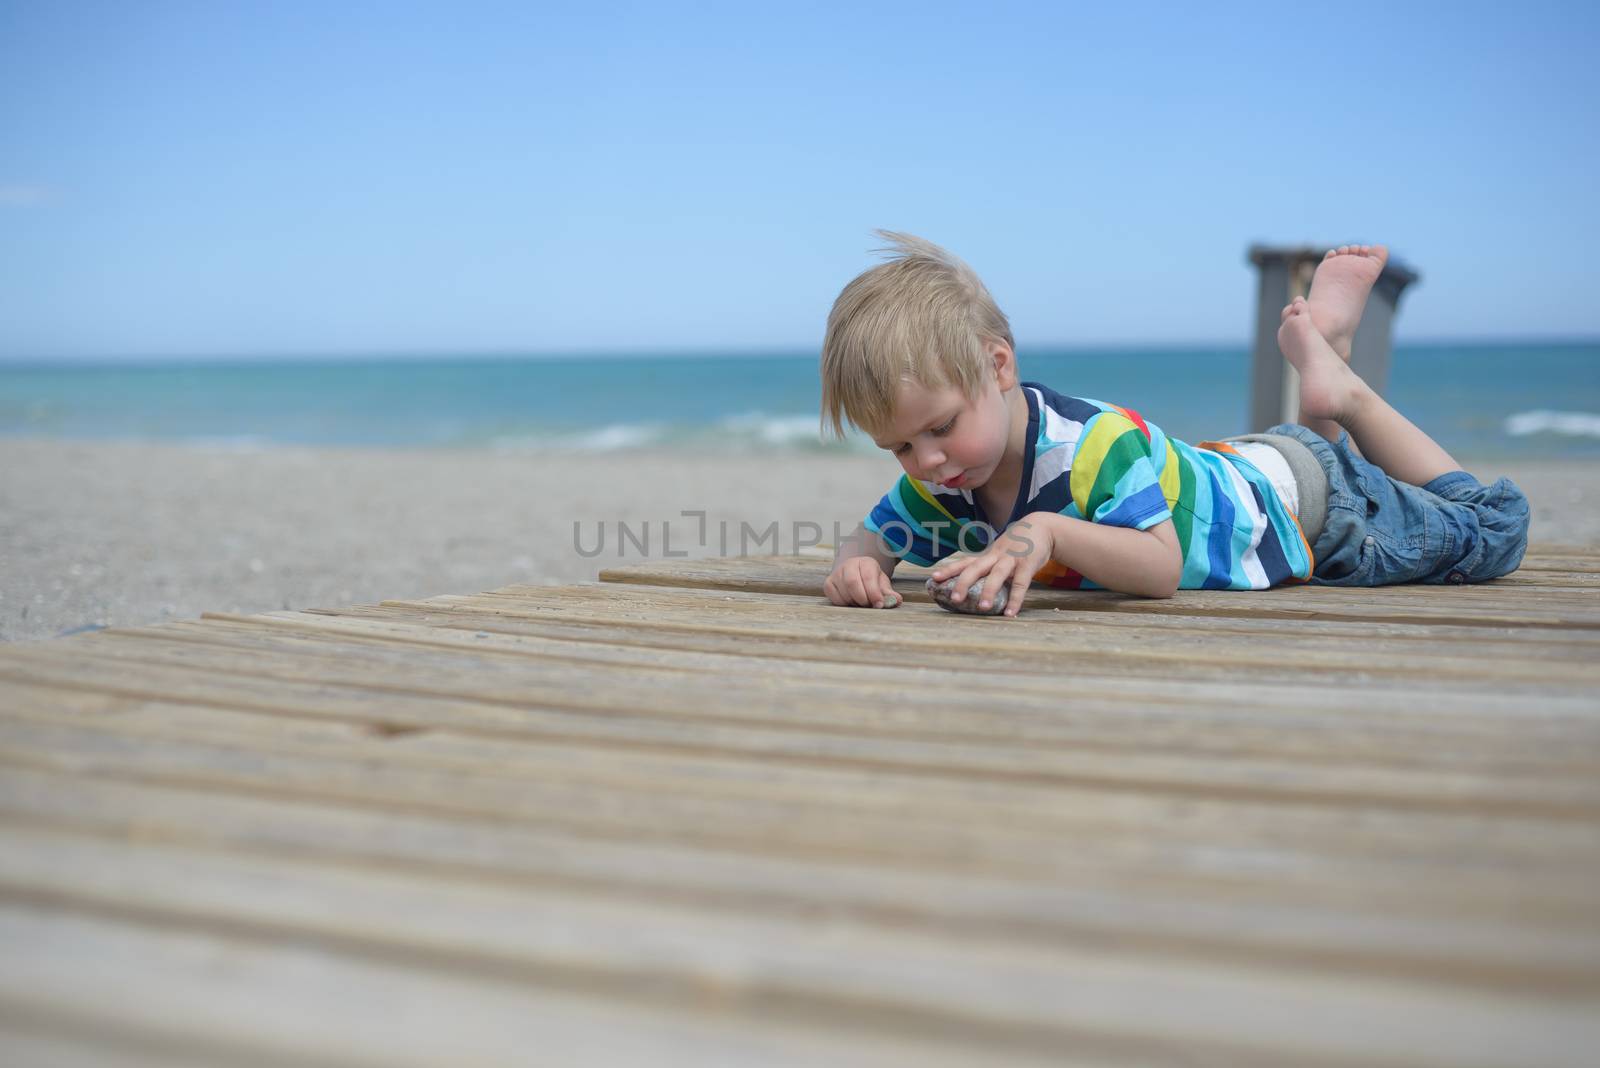 Boy resting on a wooden walkway on the beach by anytka